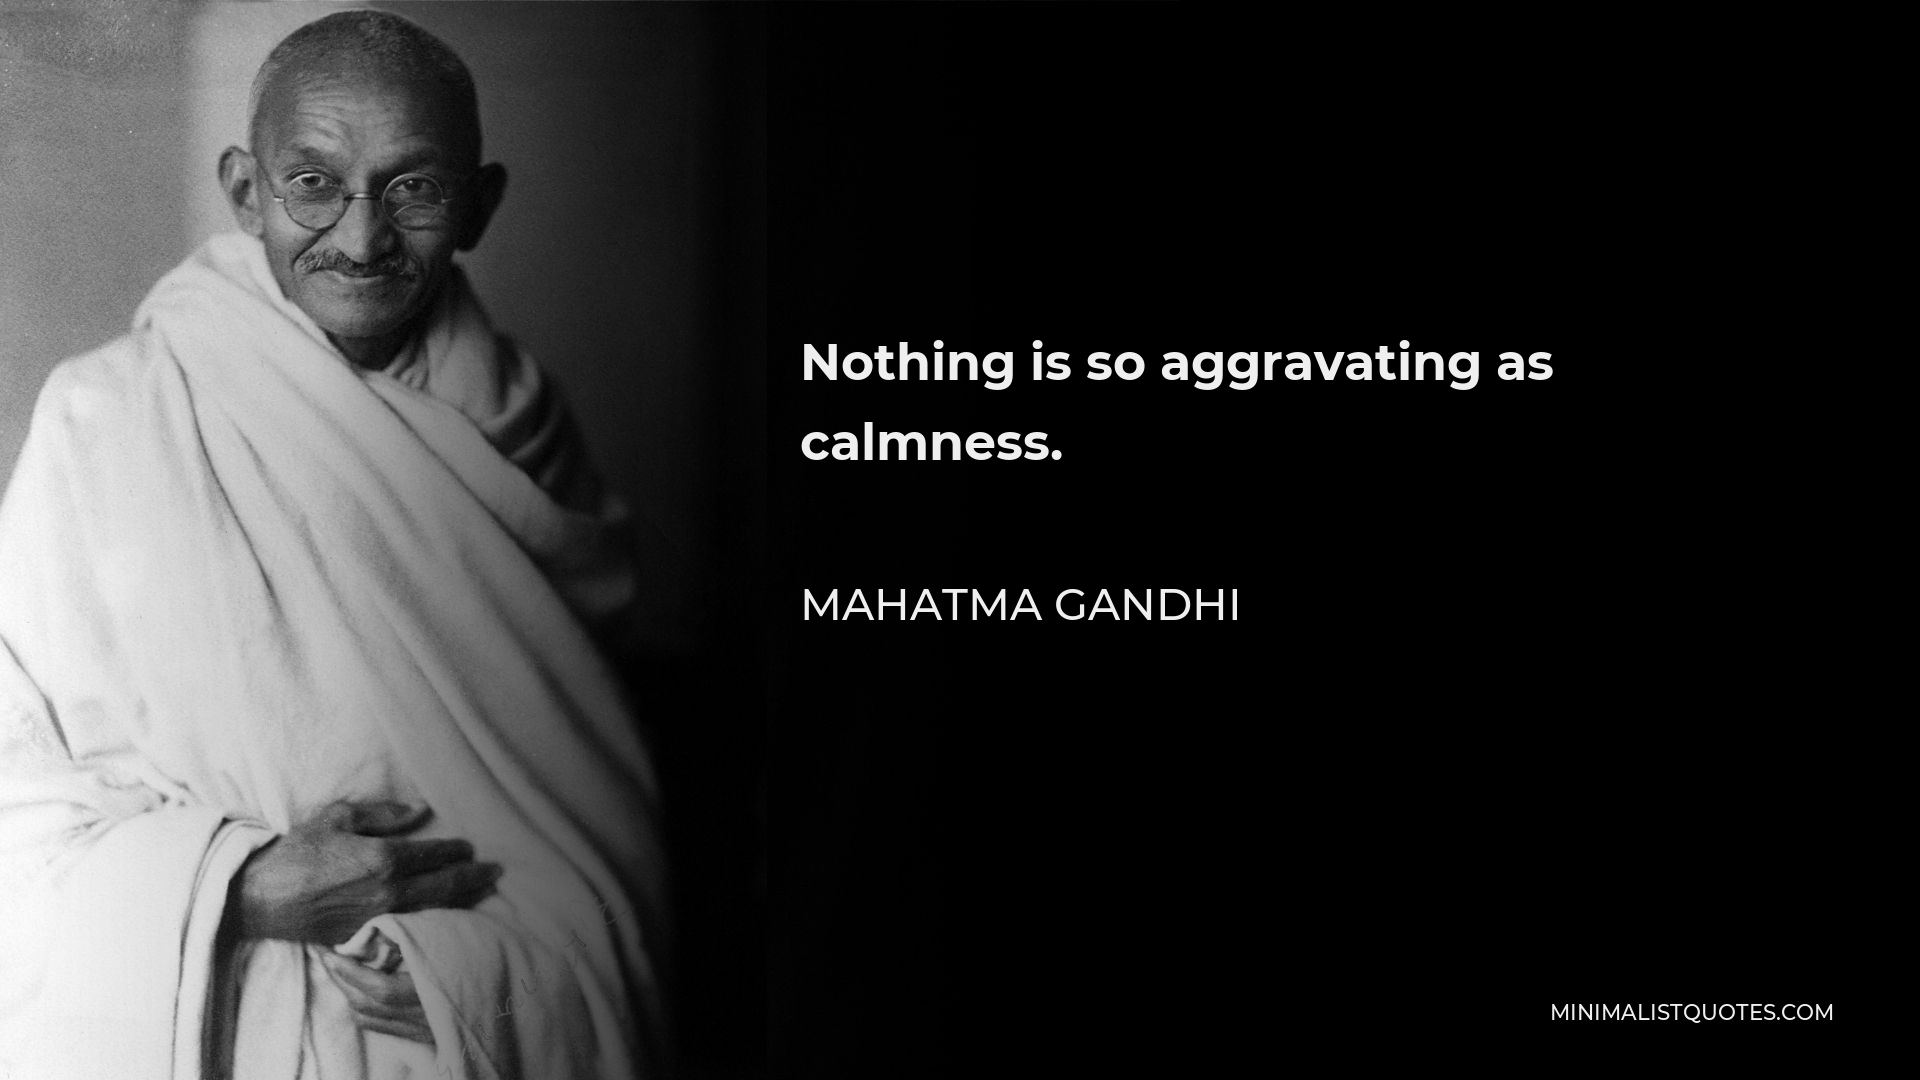 Mahatma Gandhi Quote - Nothing is so aggravating as calmness.